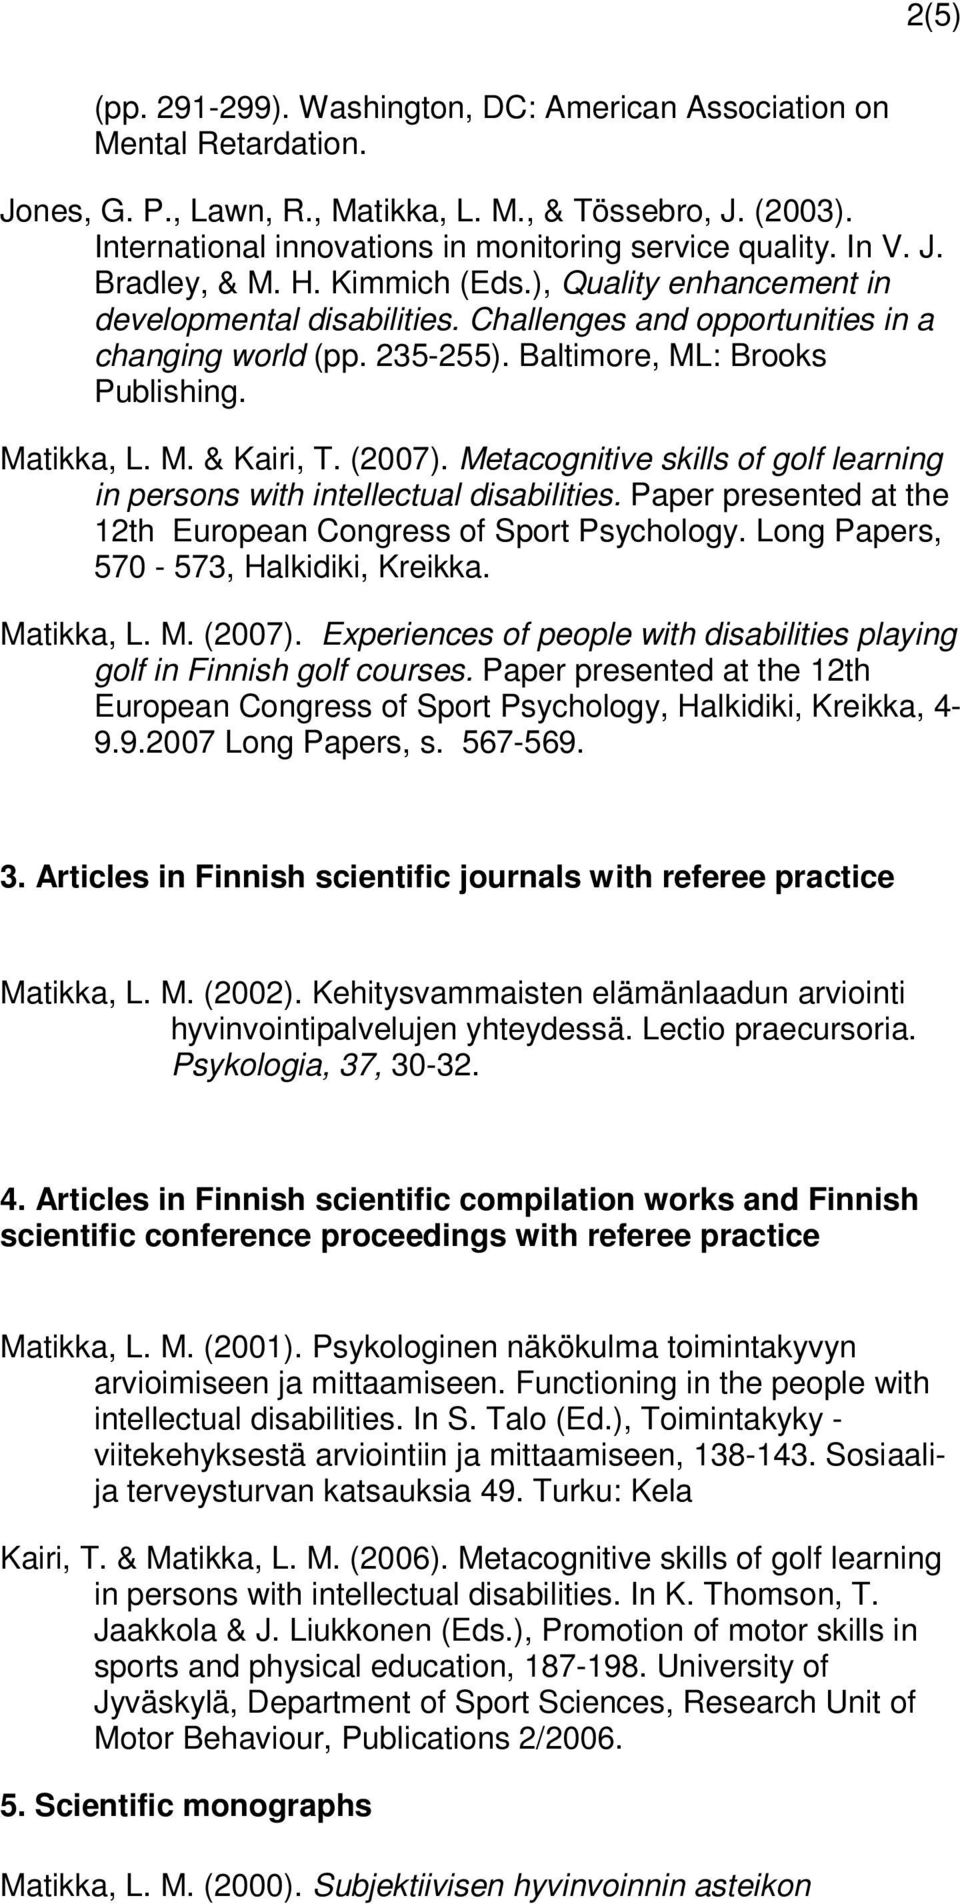 Matikka, L. M. & Kairi, T. (2007). Metacognitive skills of golf learning in persons with intellectual disabilities. Paper presented at the 12th European Congress of Sport Psychology.